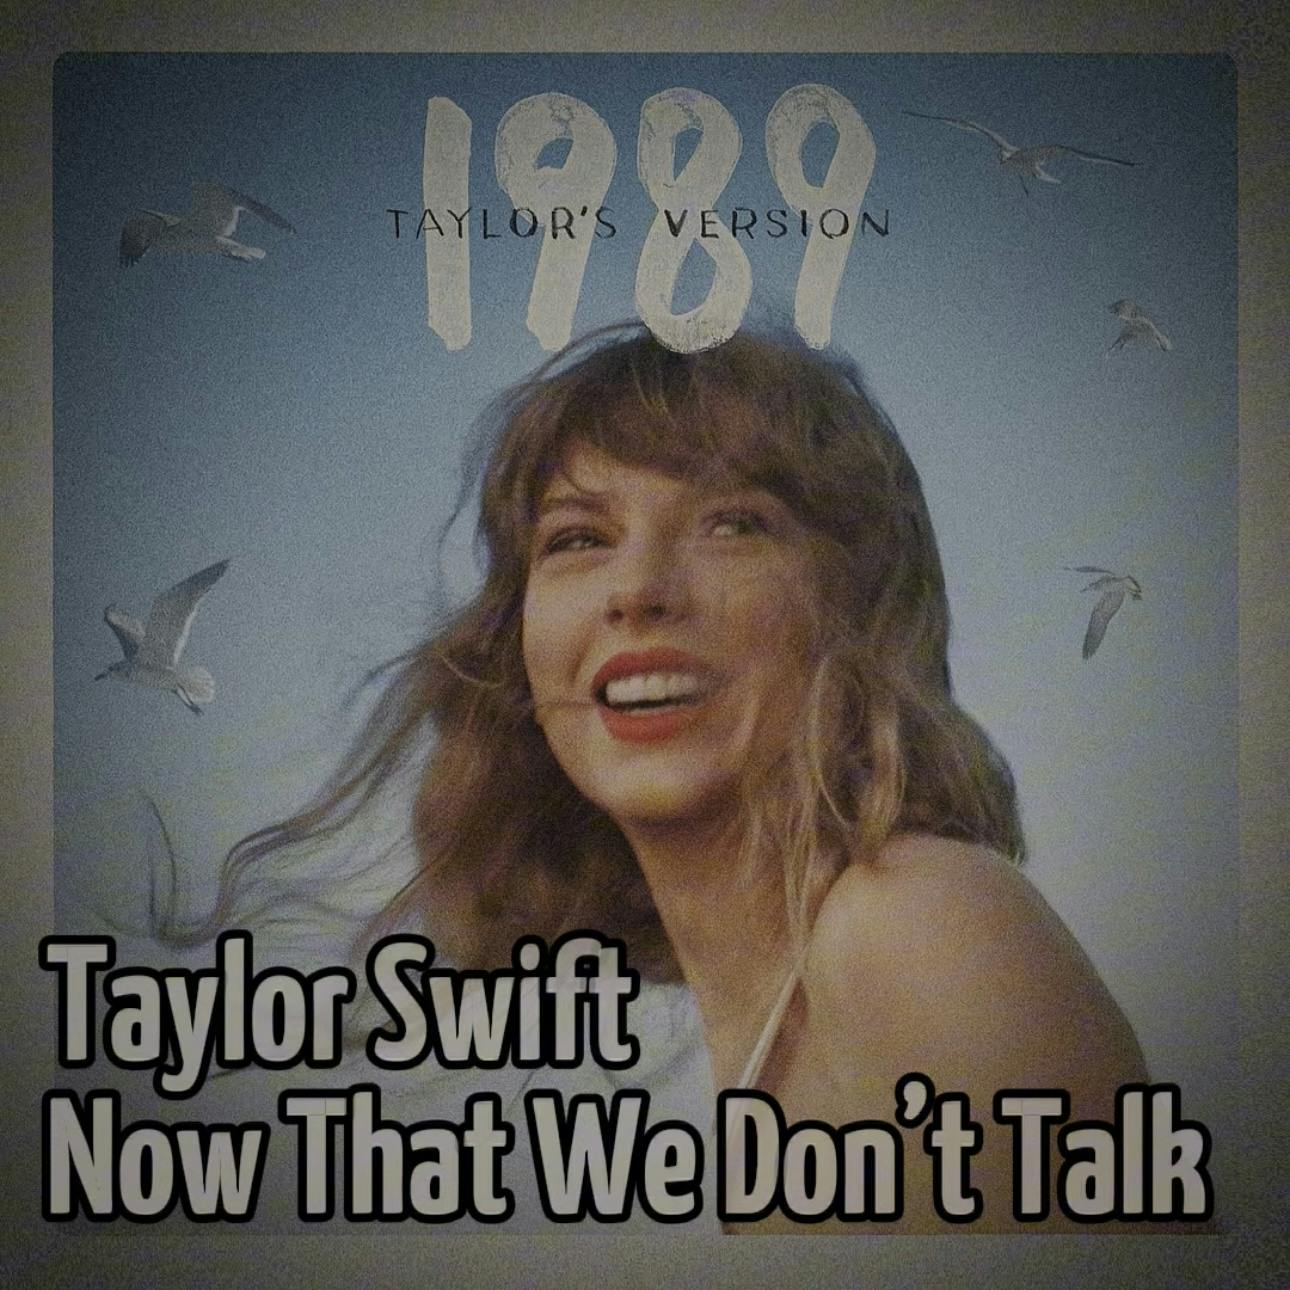 Taylor Swift - Now That We Don't Talk (Taylor's Version)